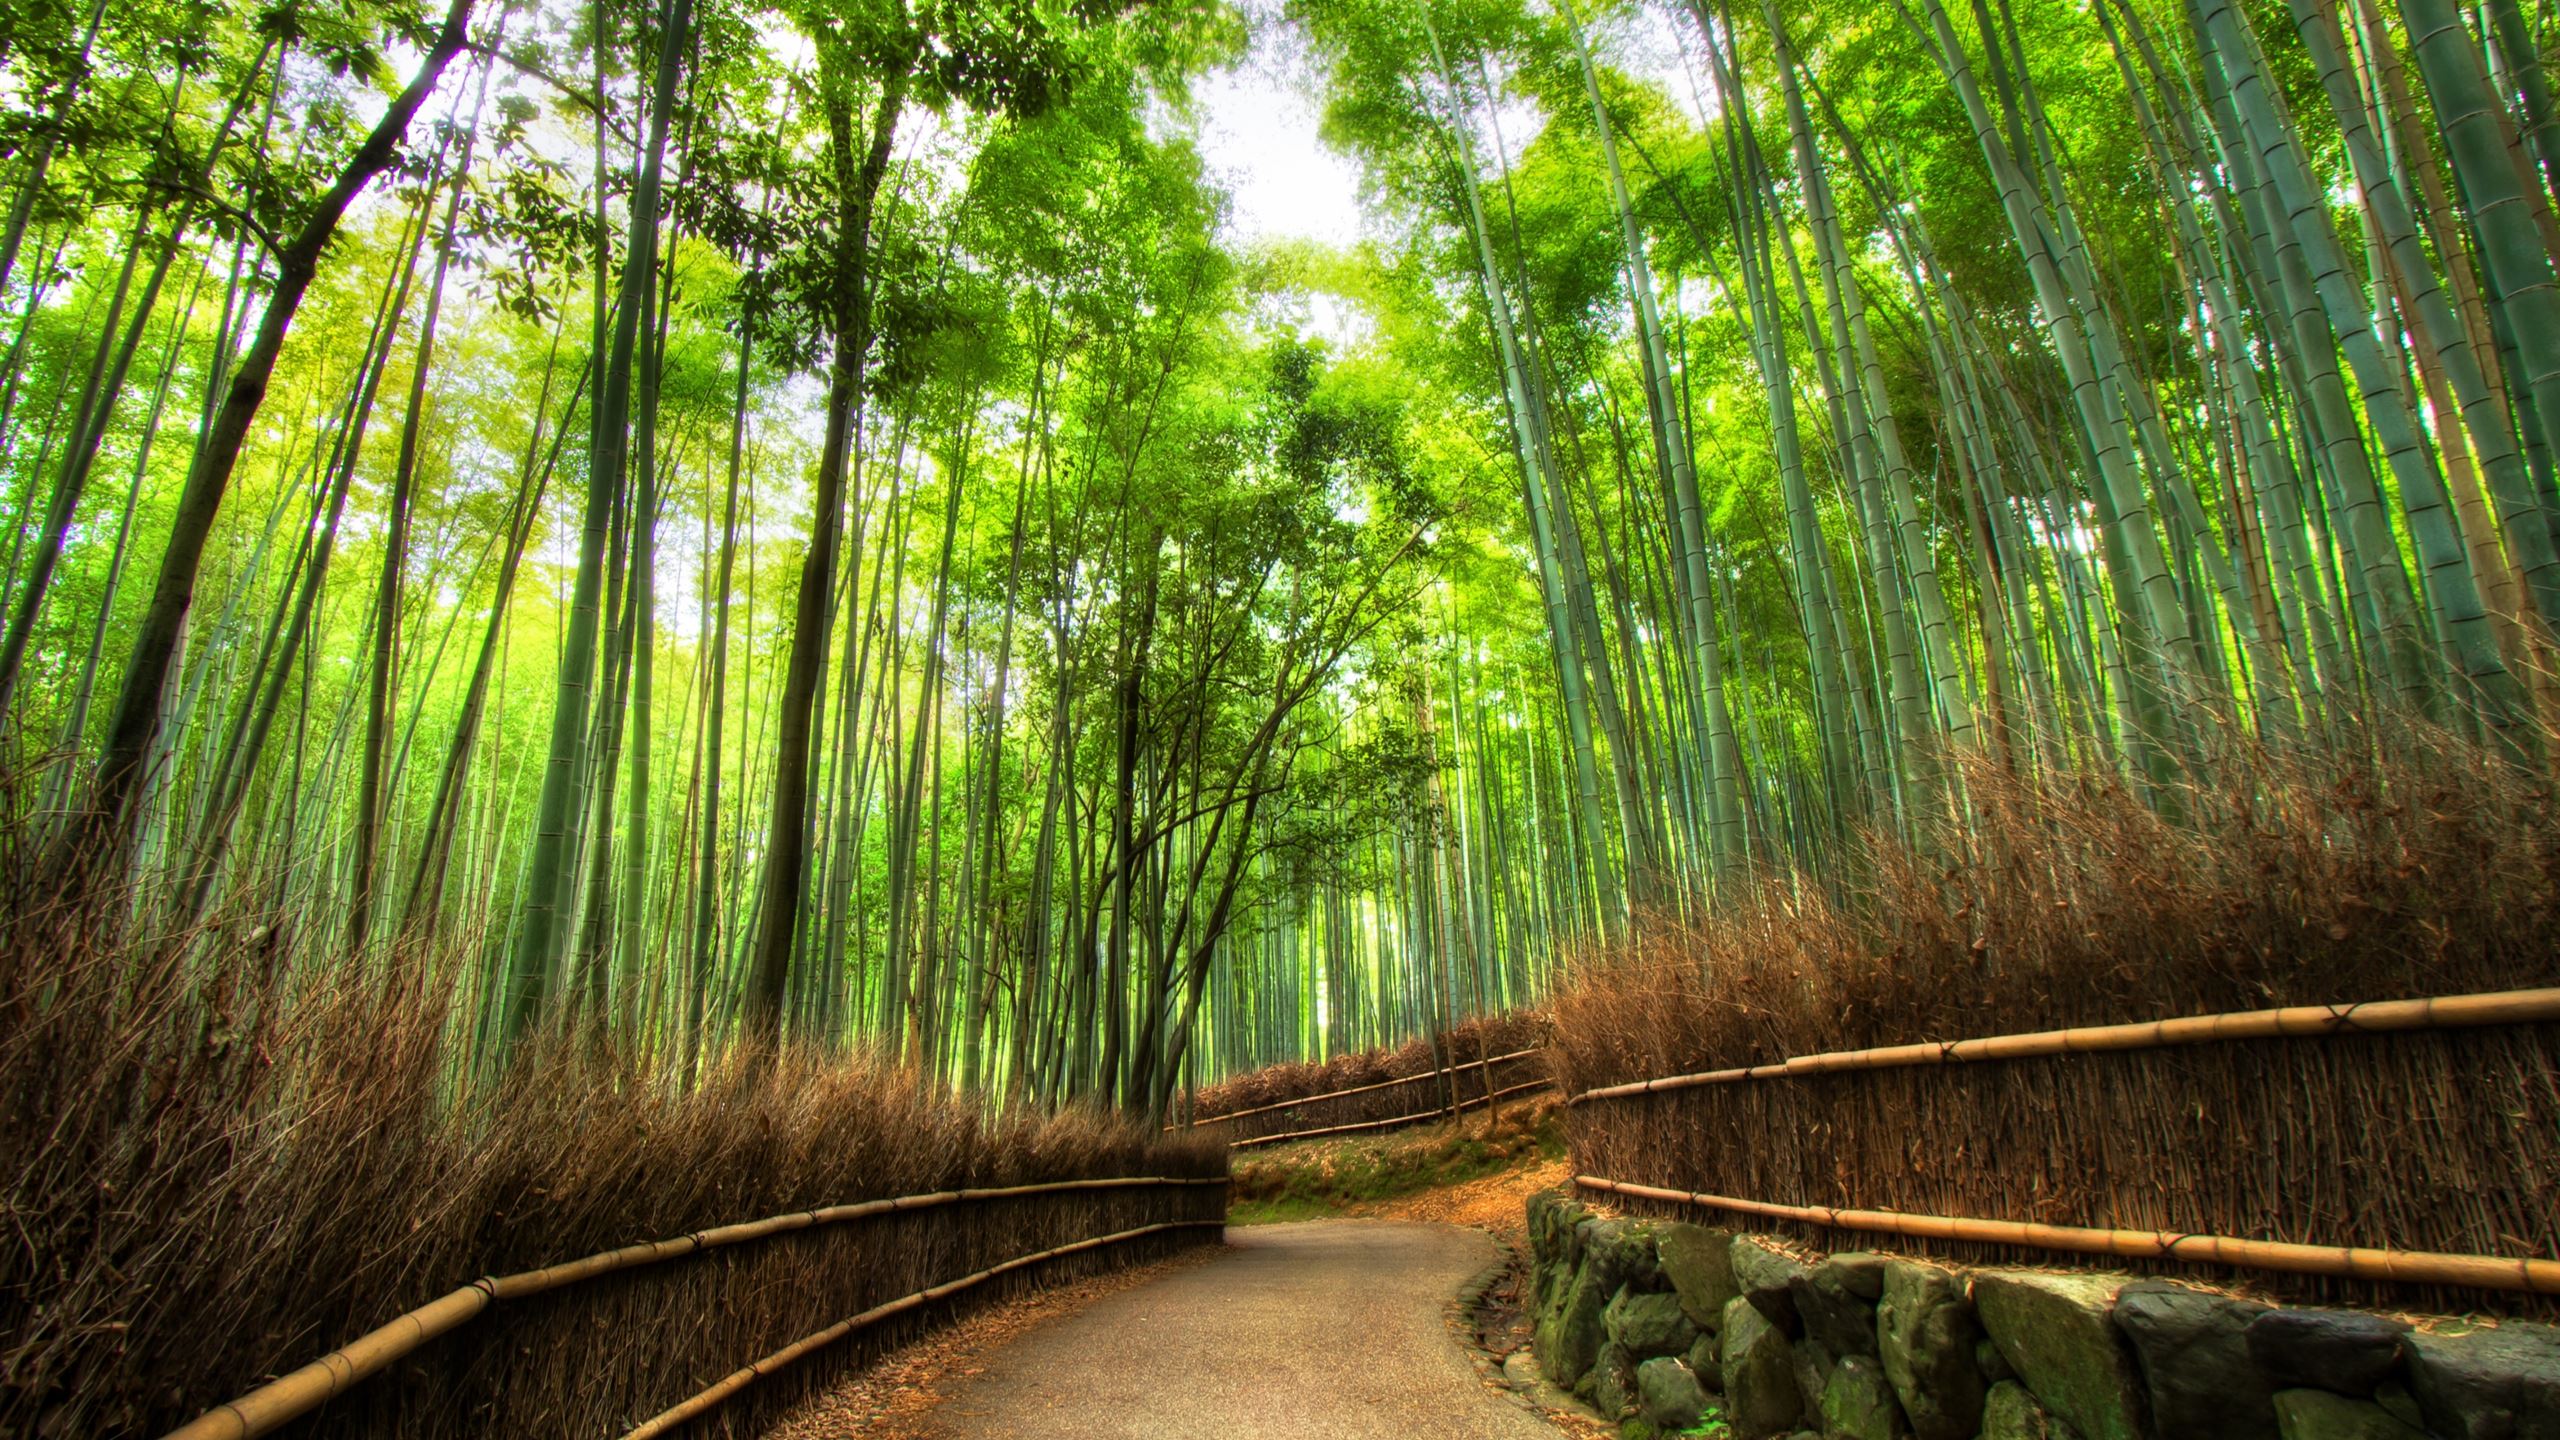 Bamboo forest iMac wallpapers. 